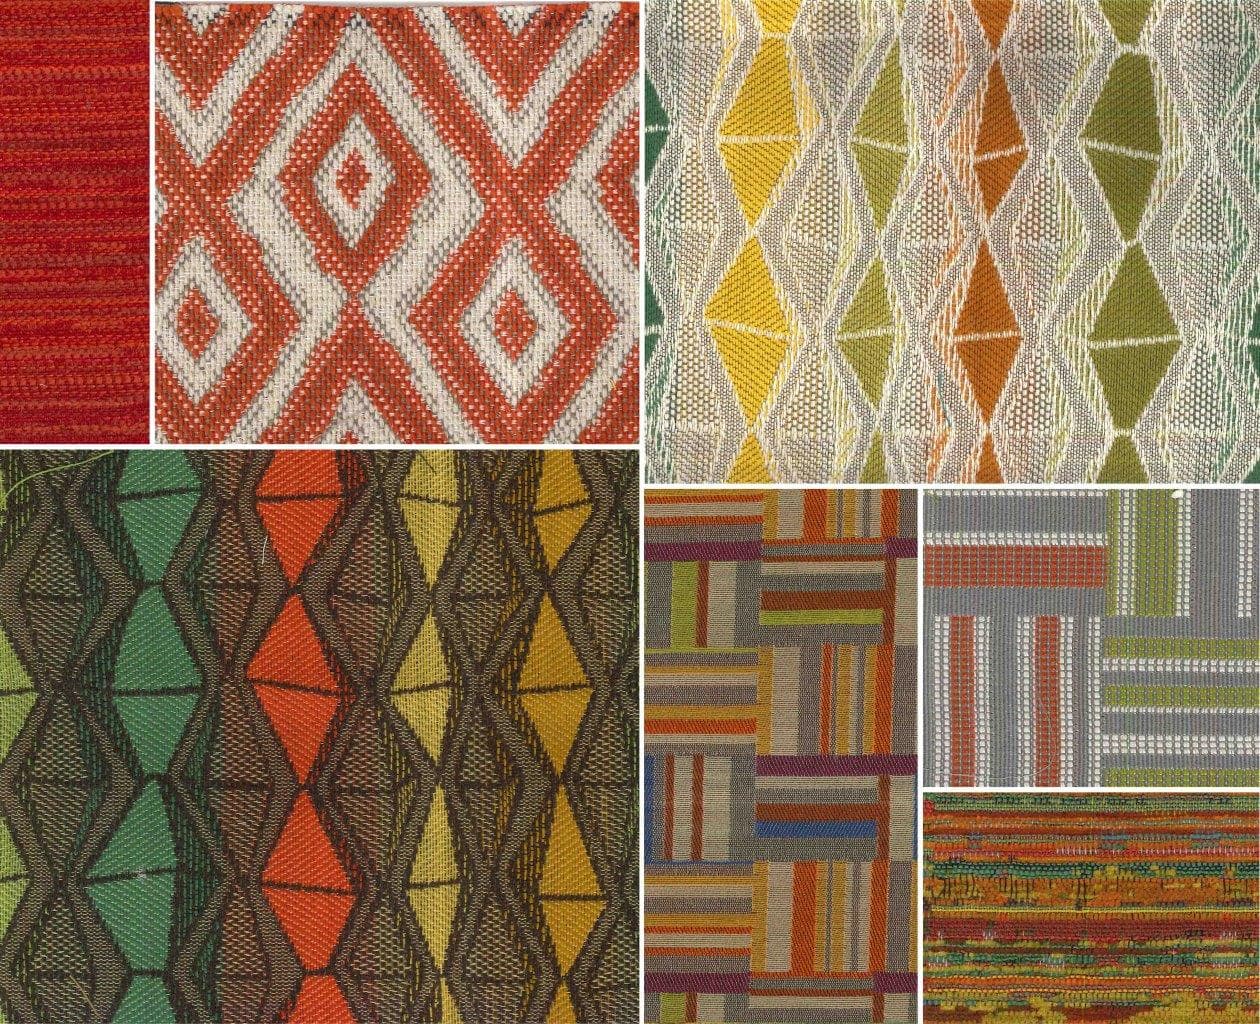 African colors in the Kravet tanzania collection designed by joni vanderslice for her j banks collection